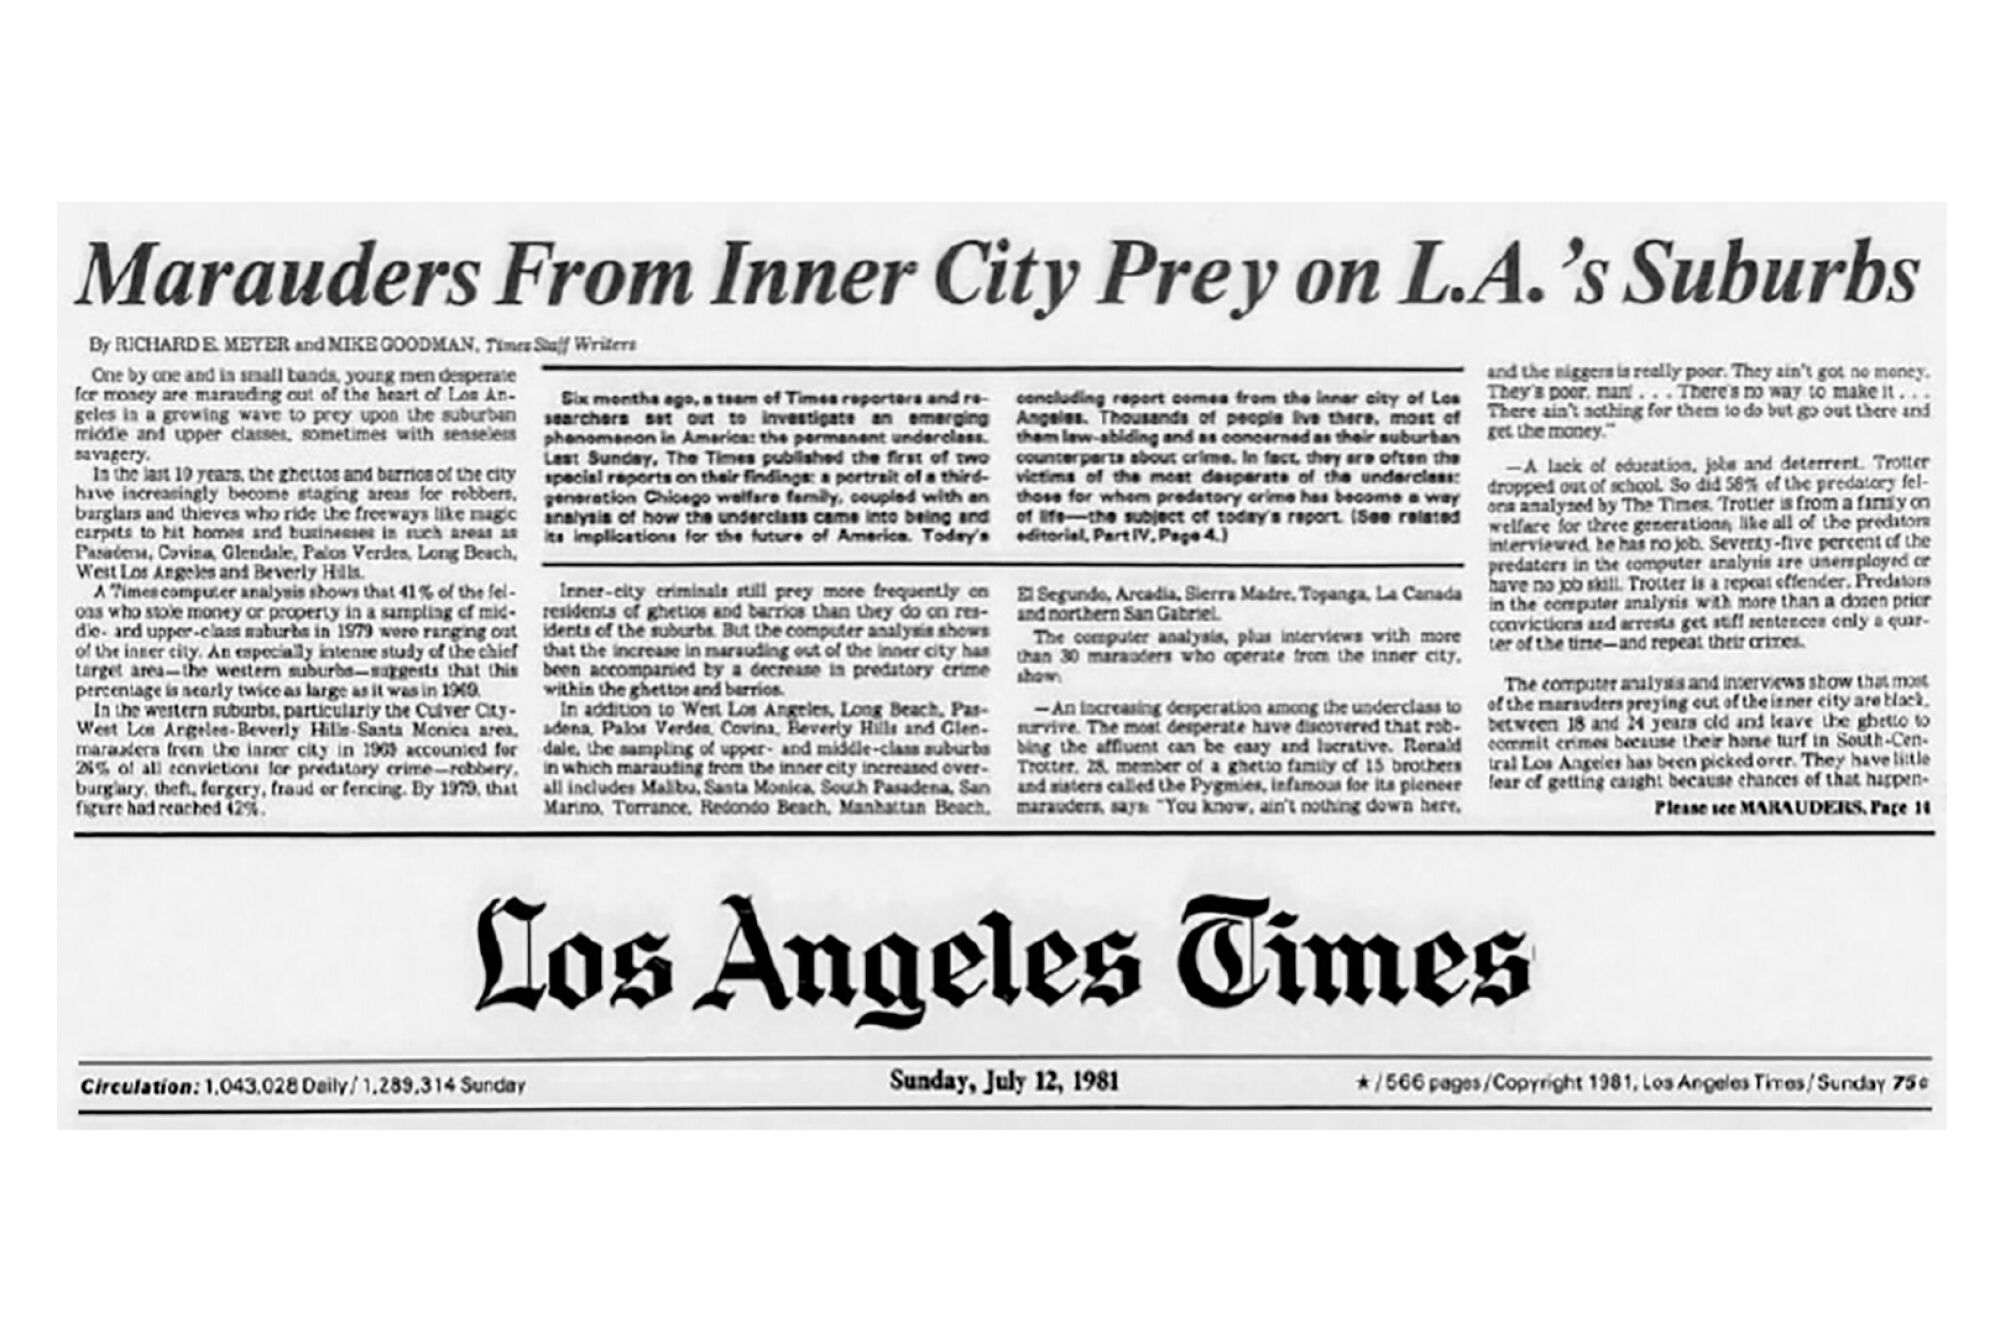 Headline reads "Marauders from inner city prey on LA's suburbs" at the top of a 1981 Los Angeles Times front page